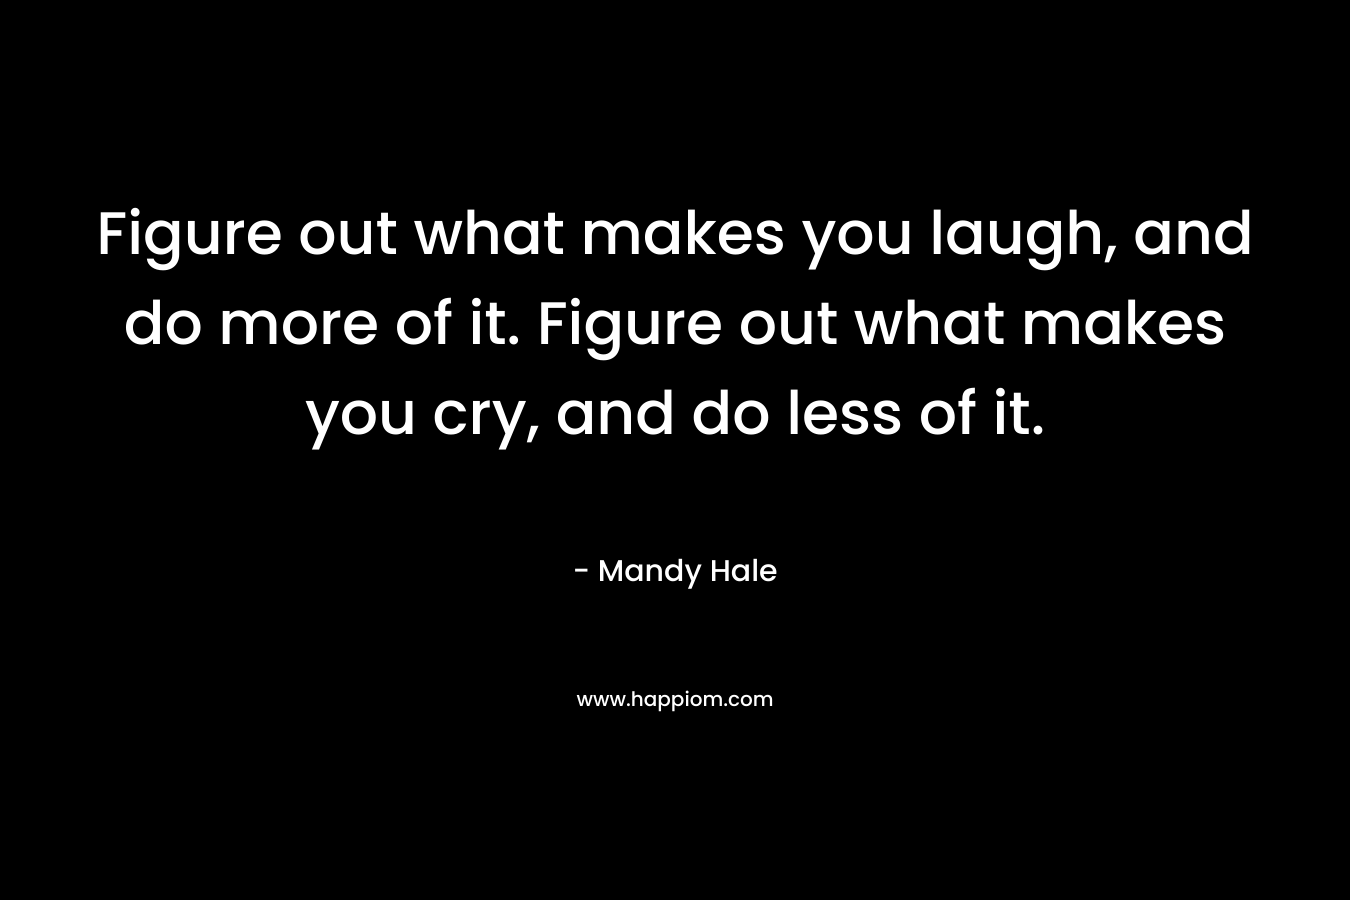 Figure out what makes you laugh, and do more of it. Figure out what makes you cry, and do less of it.